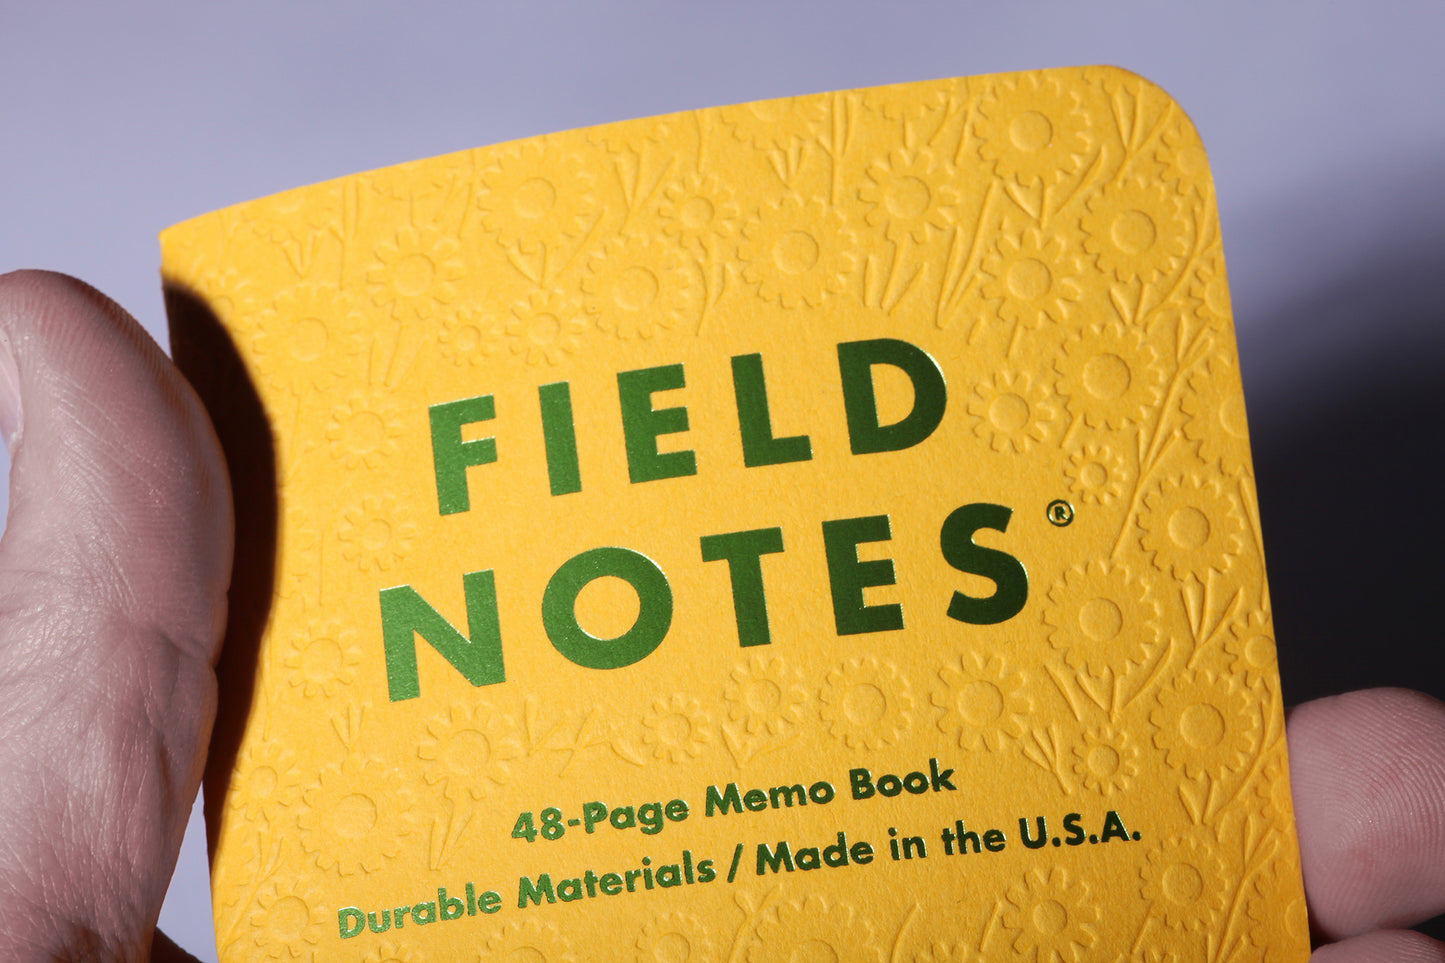 Field Notes Signs of Spring Notebook - Dot-Graph (3-Pack)